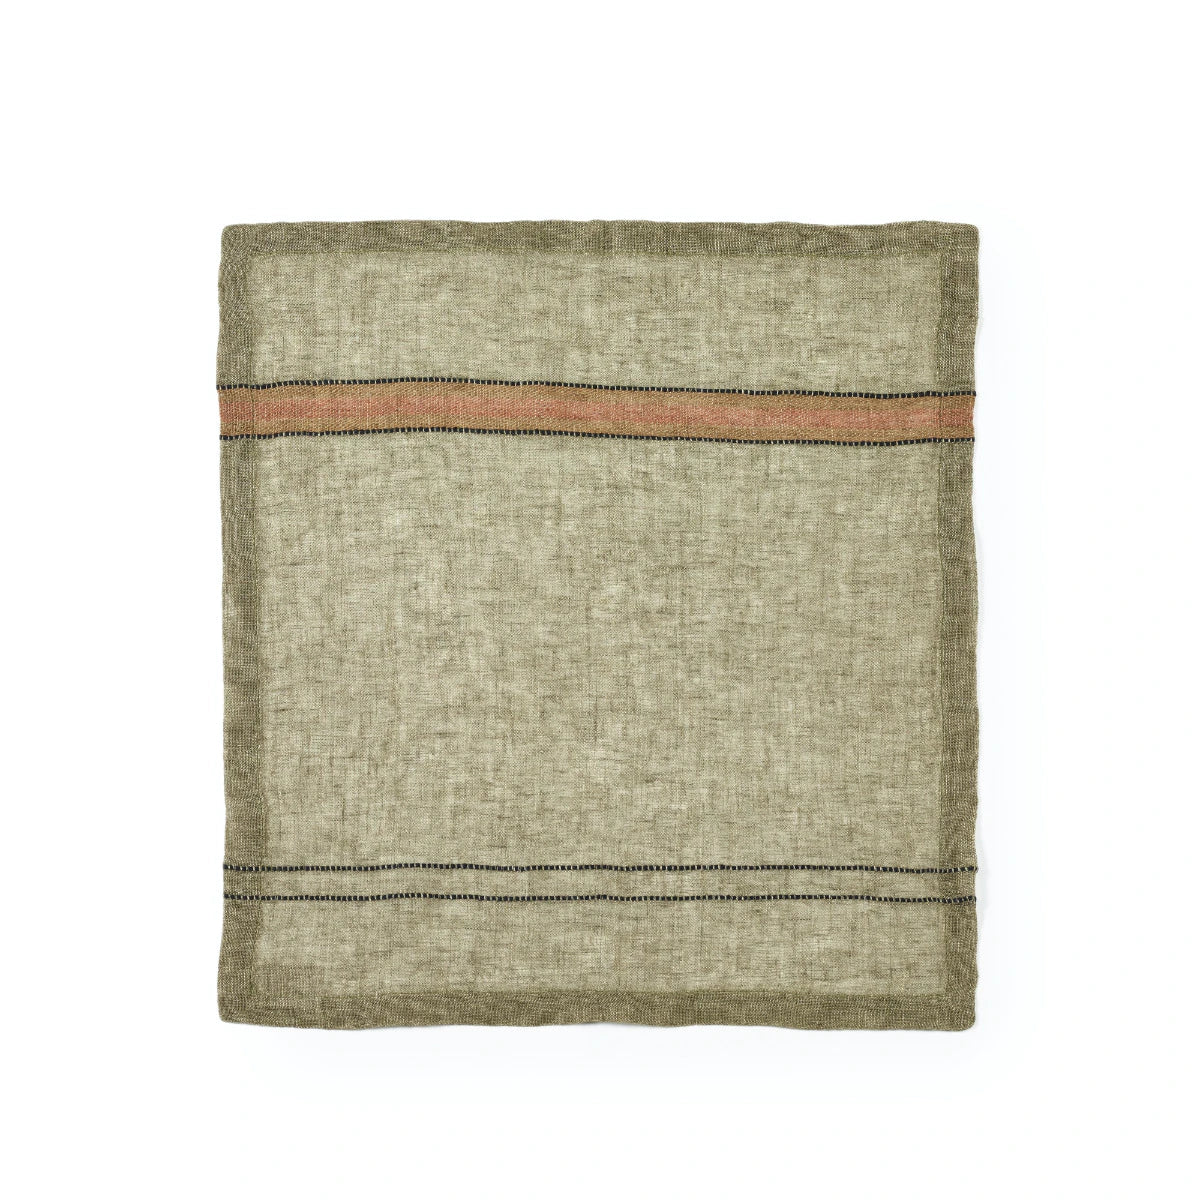 marie napkin by Libeco at adorn.house